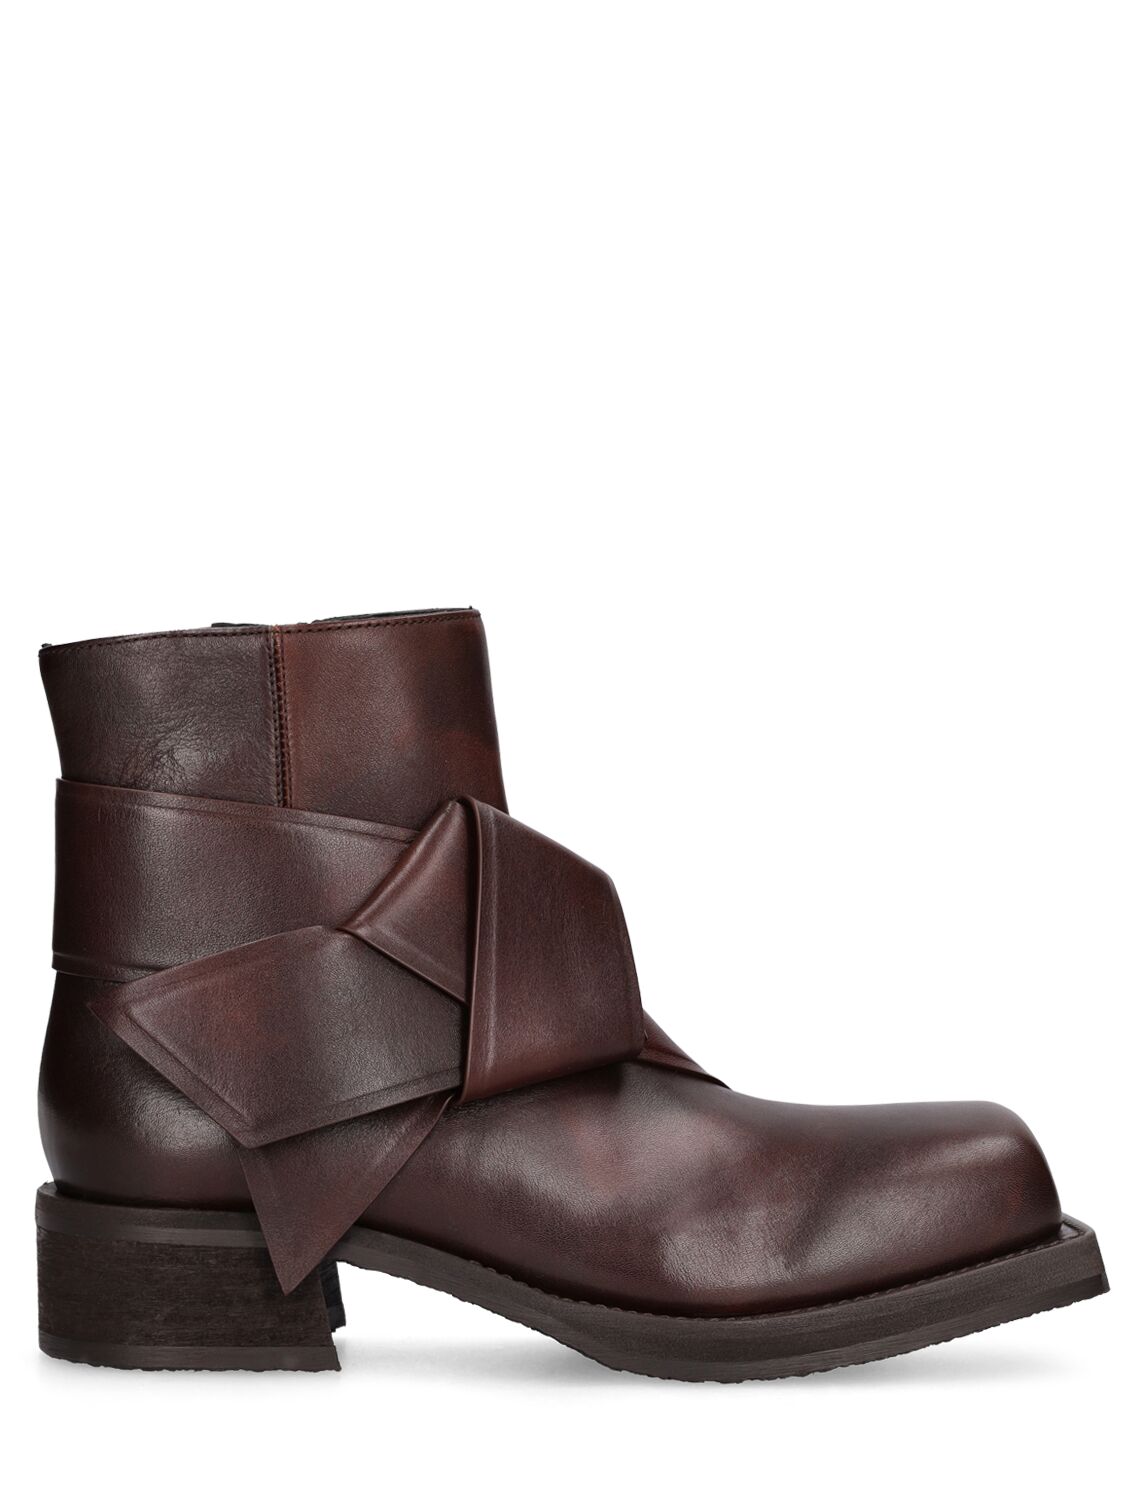 Acne Studios Musubli Leather Ankle Boots In Brown